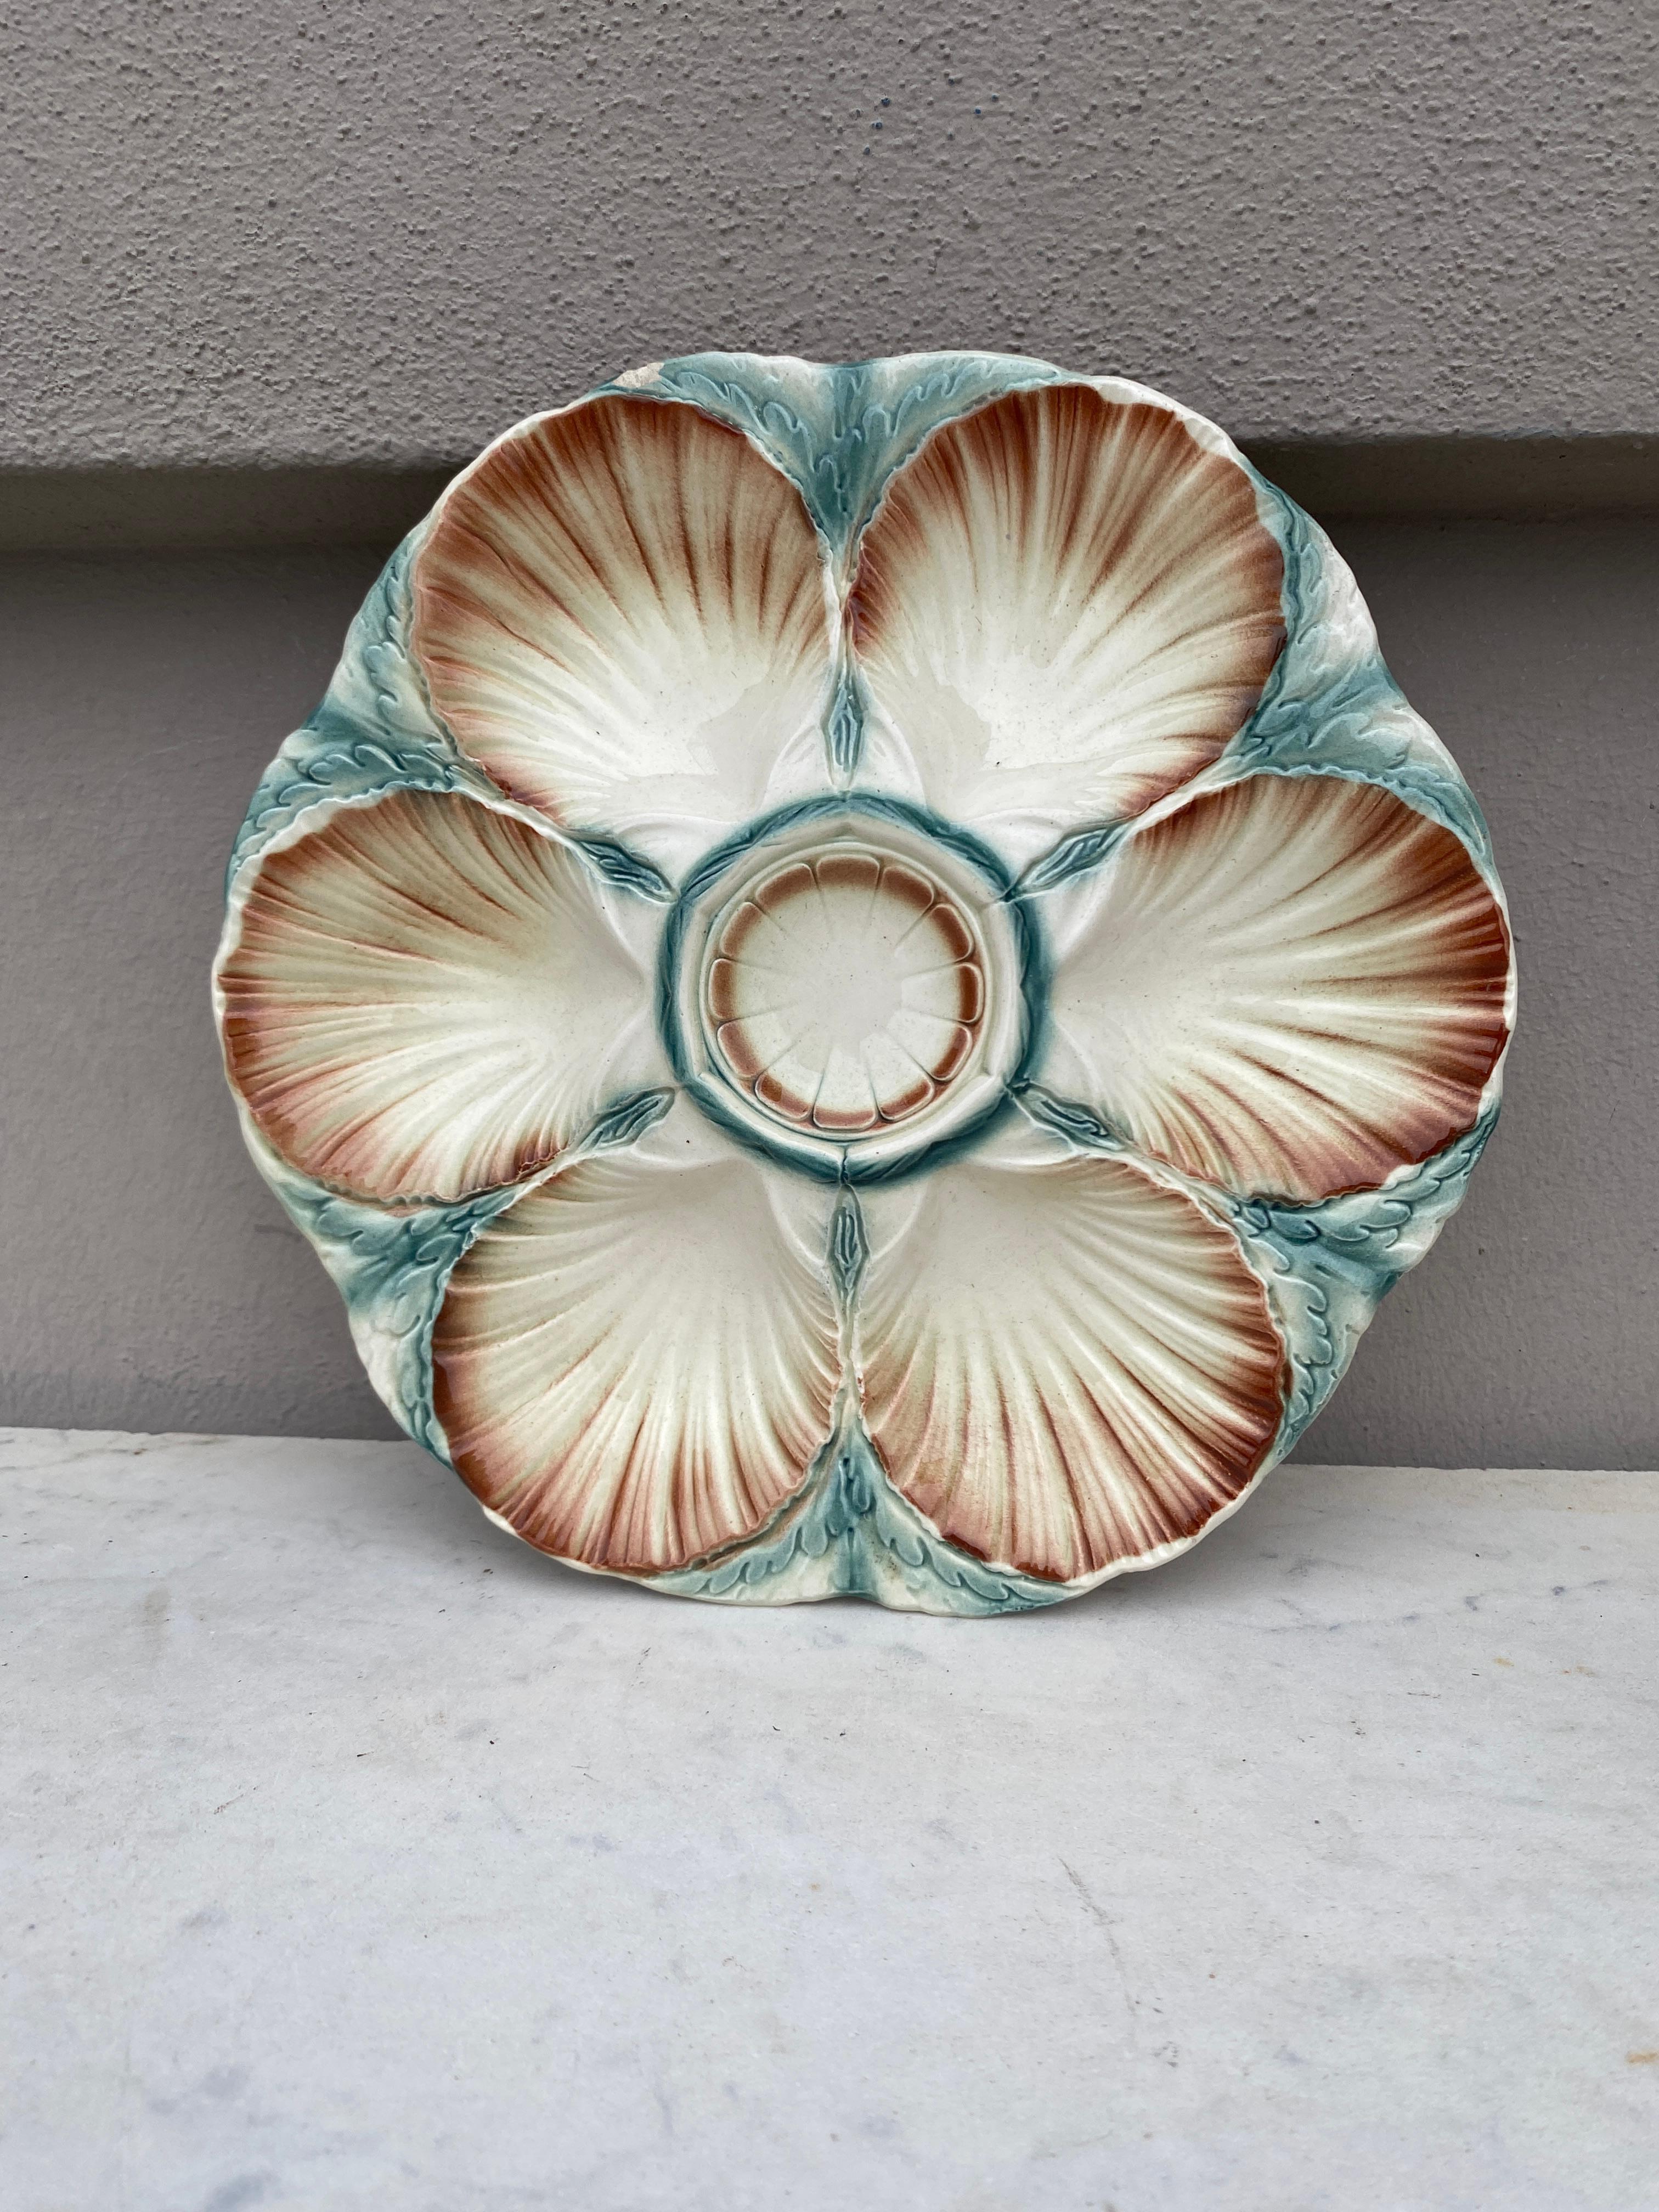 Majolica oyster plate Sarreguemines, circa 1920.
6 shells and space for the lemon on the center.
